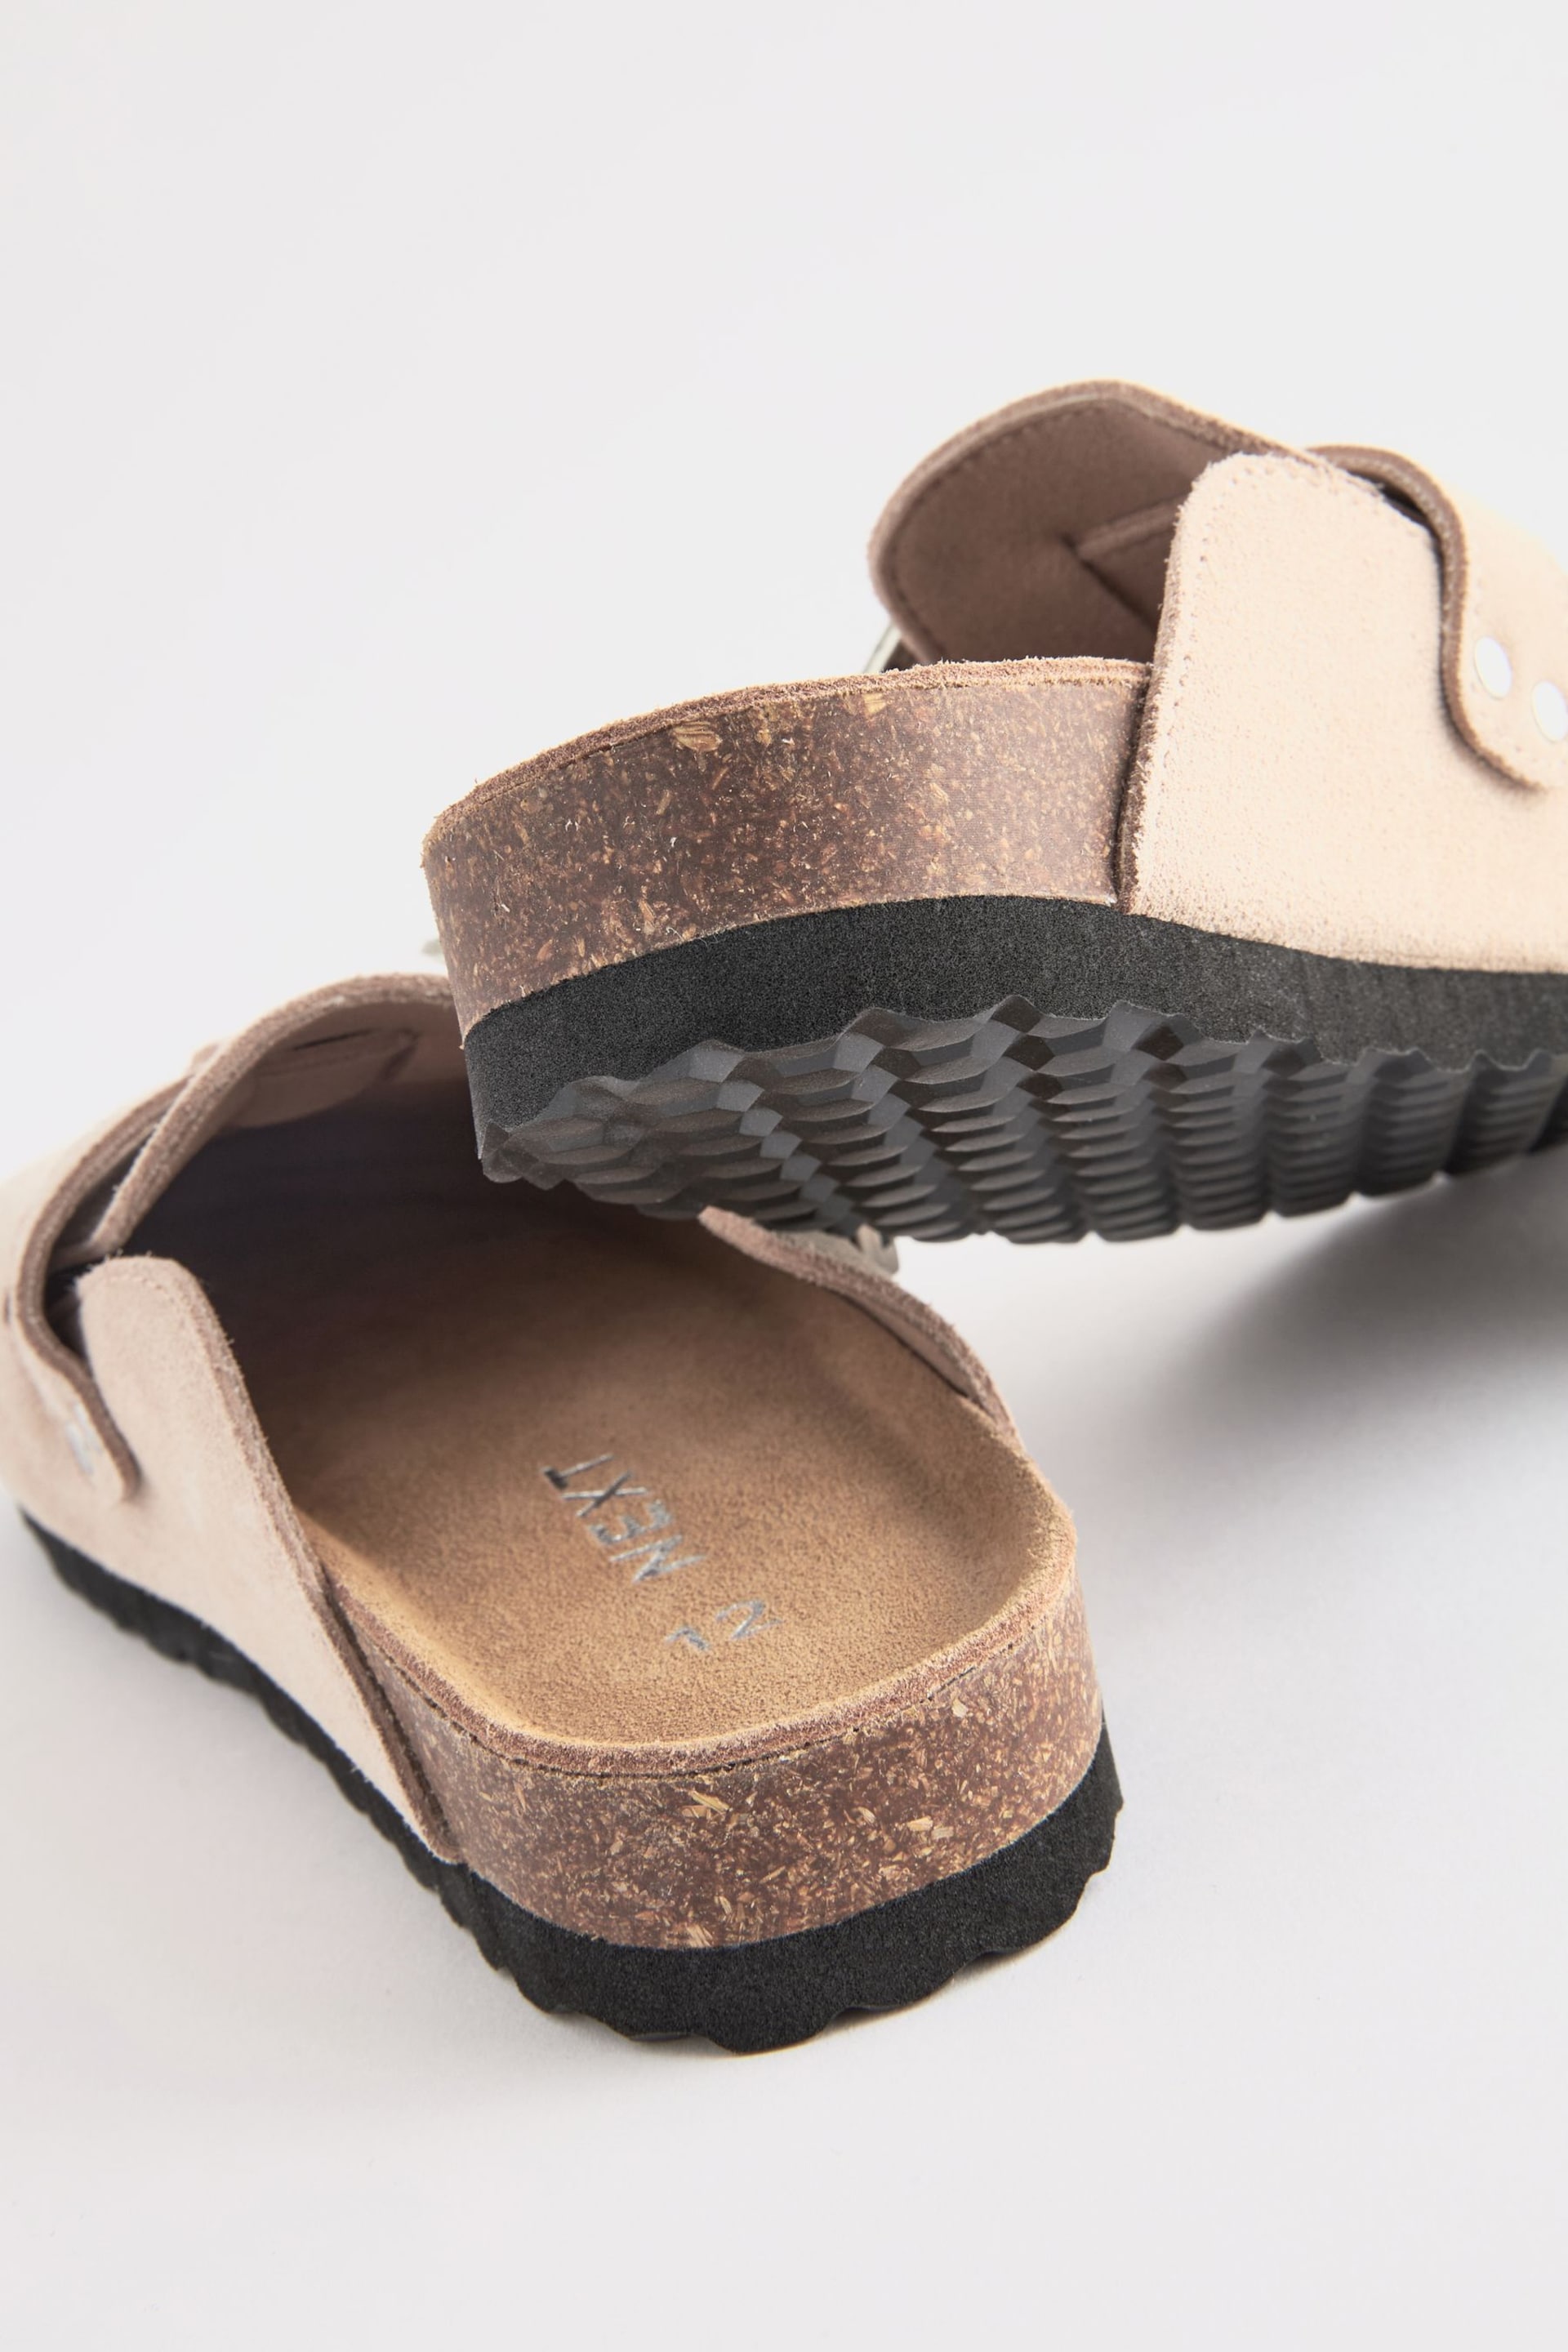 Neutral Western Buckle Suede Slip-On Clogs - Image 5 of 6